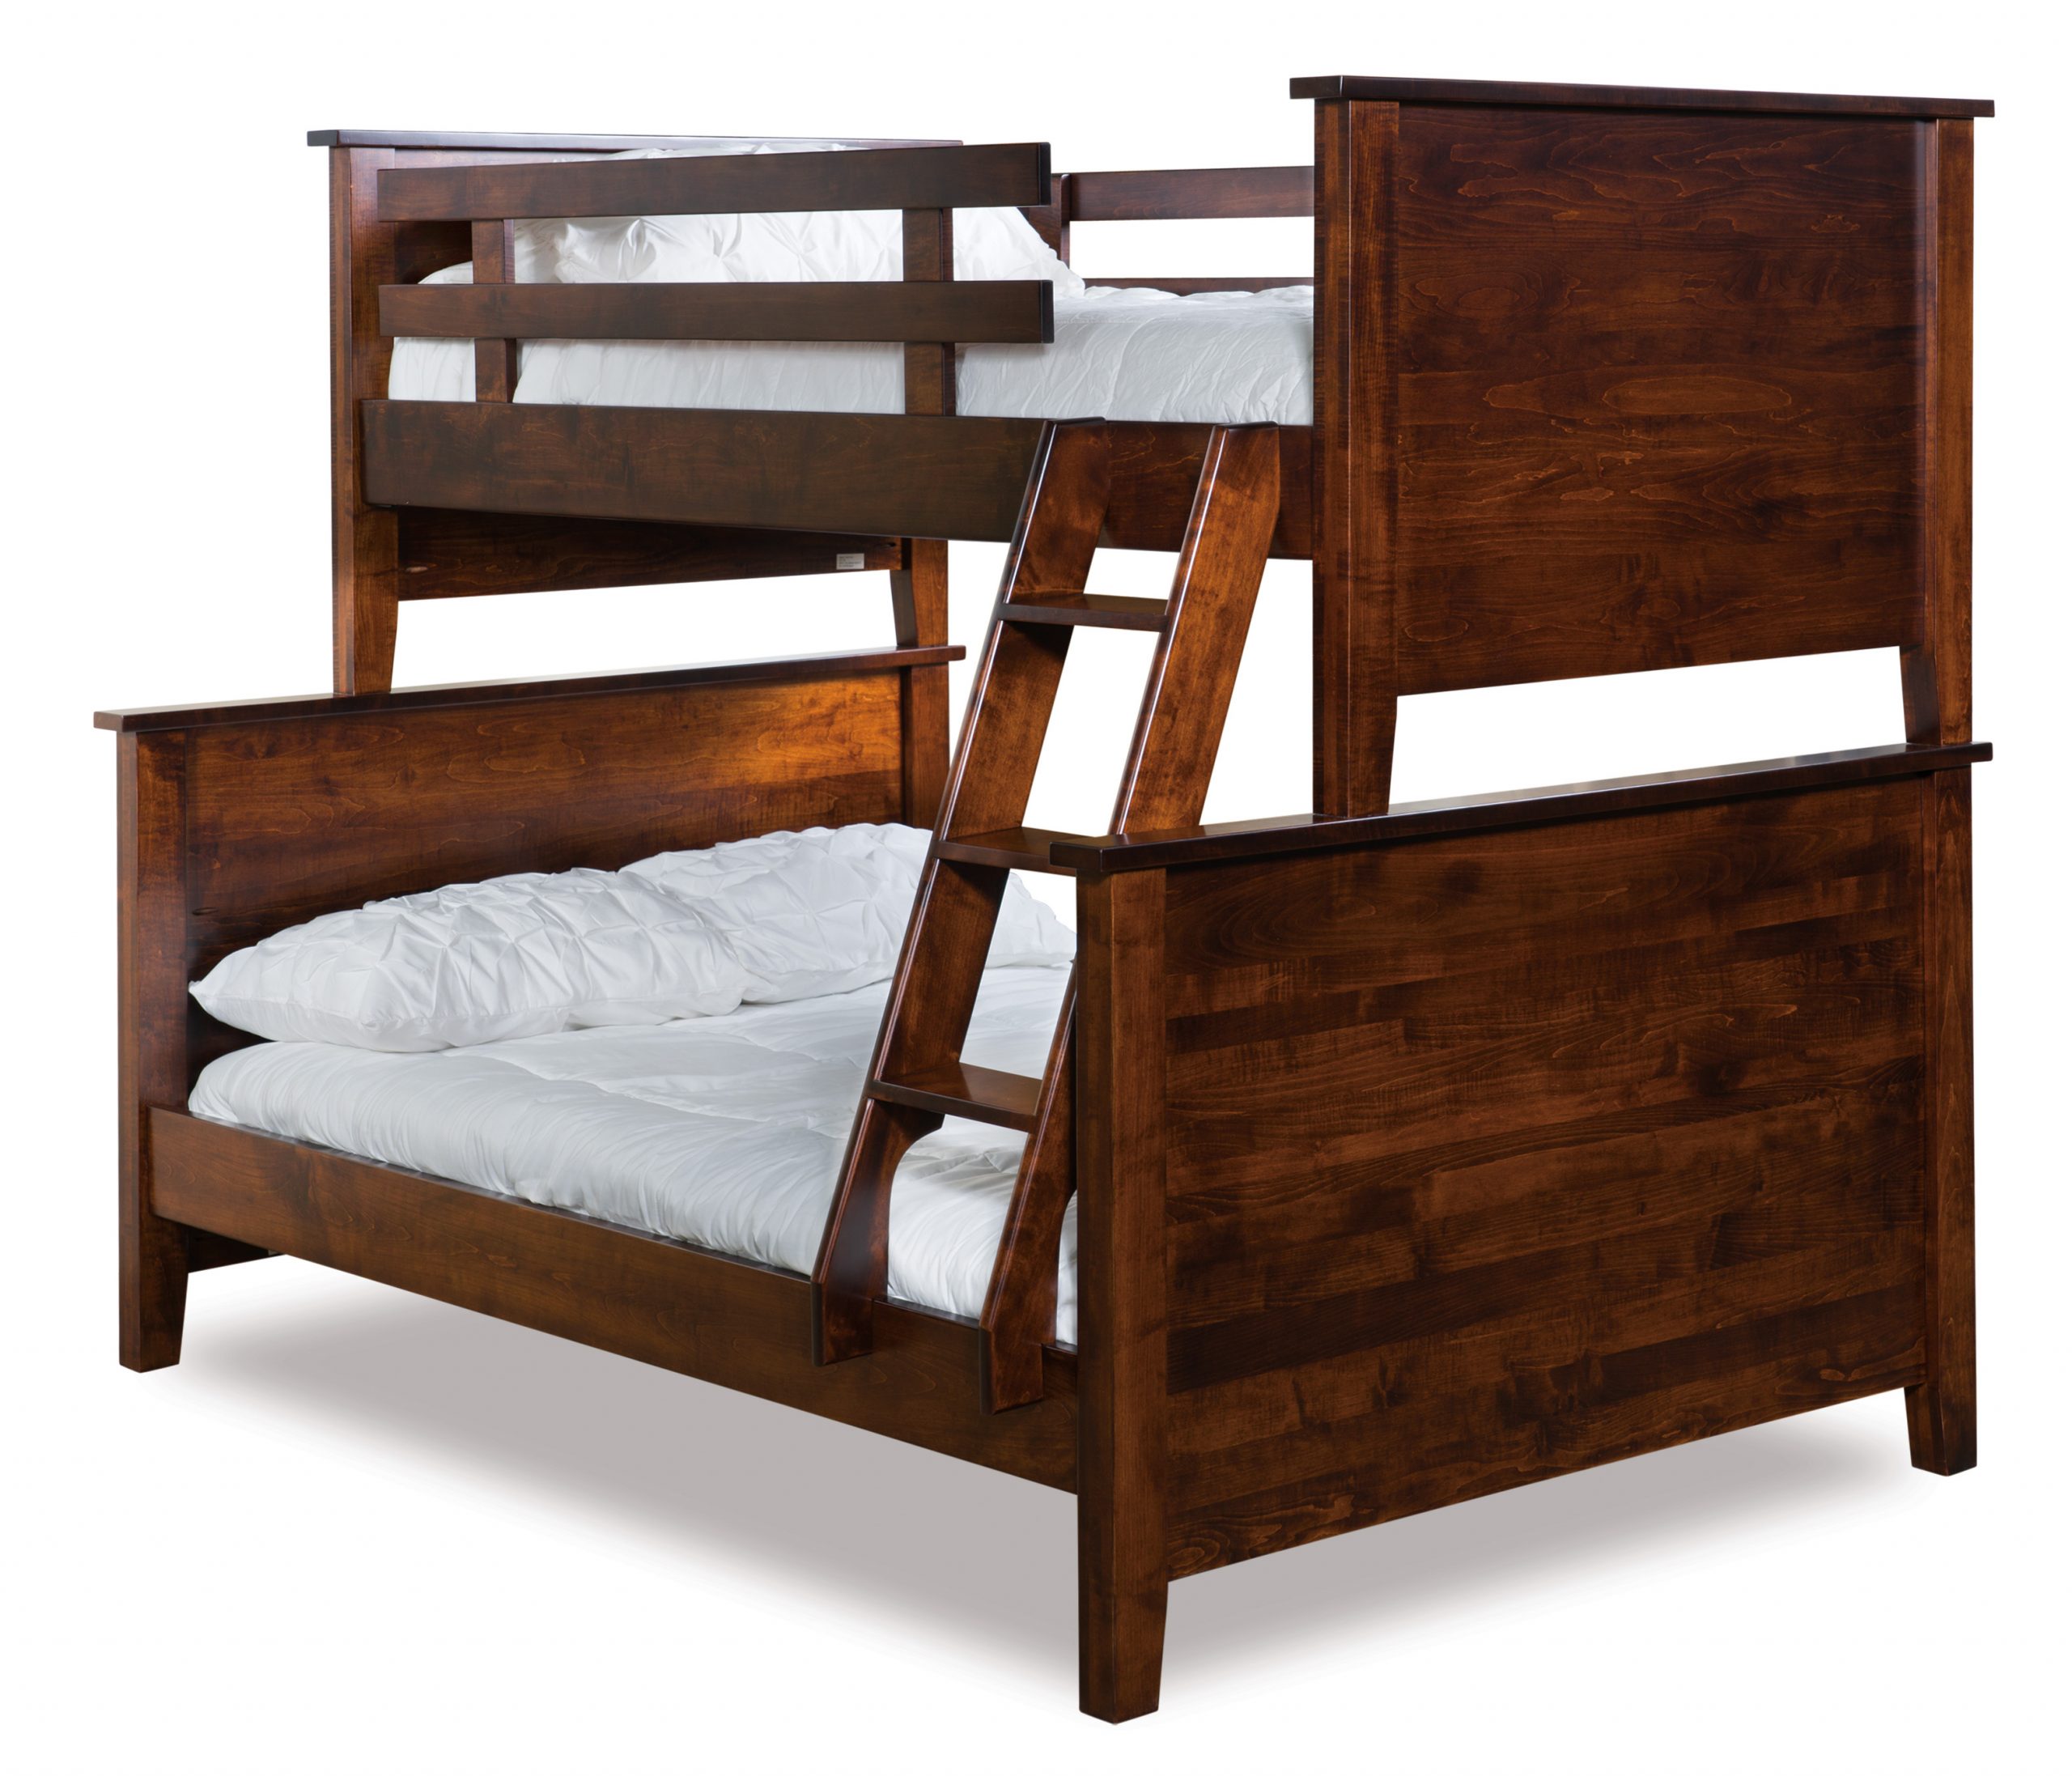 Shaker Bunk Bed | Amish Solid Wood Beds | Kvadro Furniture